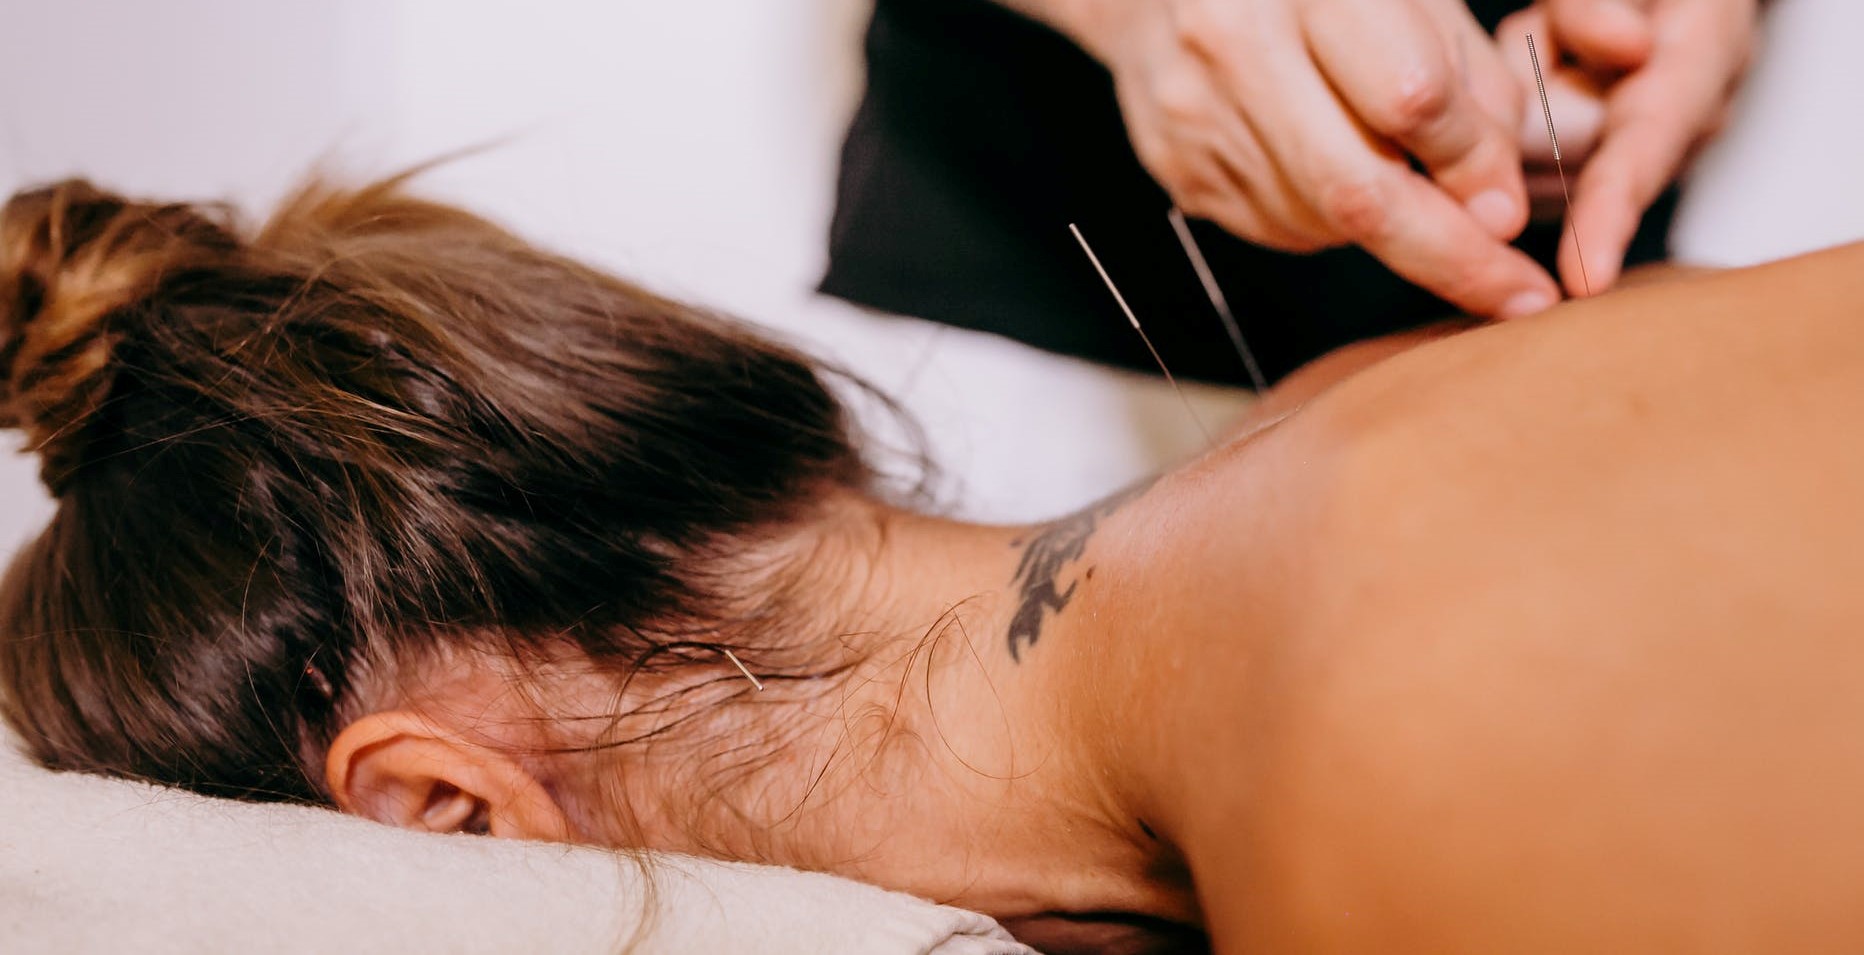 A Skeptic’s Adventures in Acupuncture